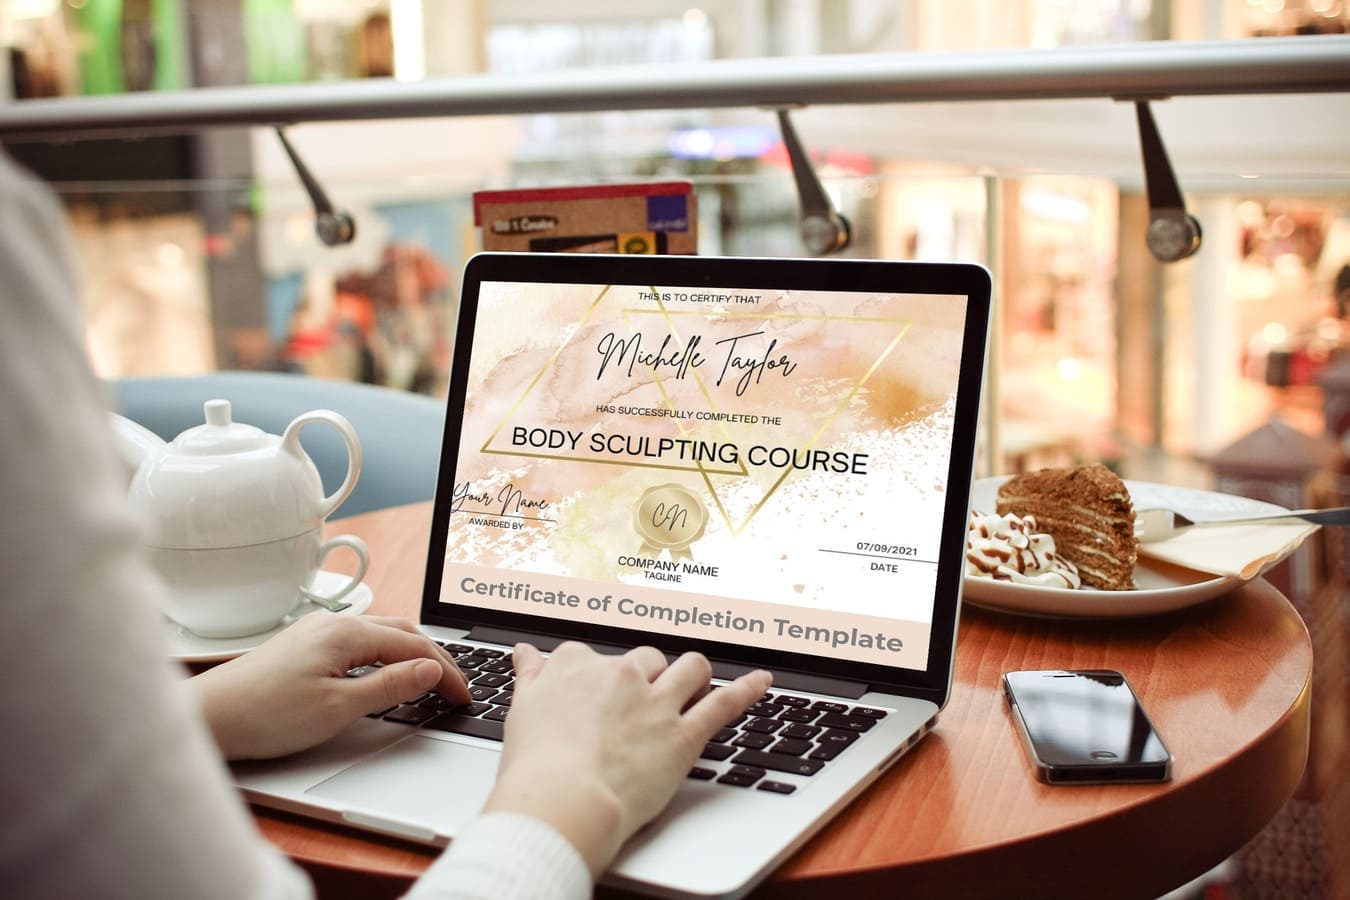 Certificate Of Completion Template - Body Sculpting Course On The Laptop.